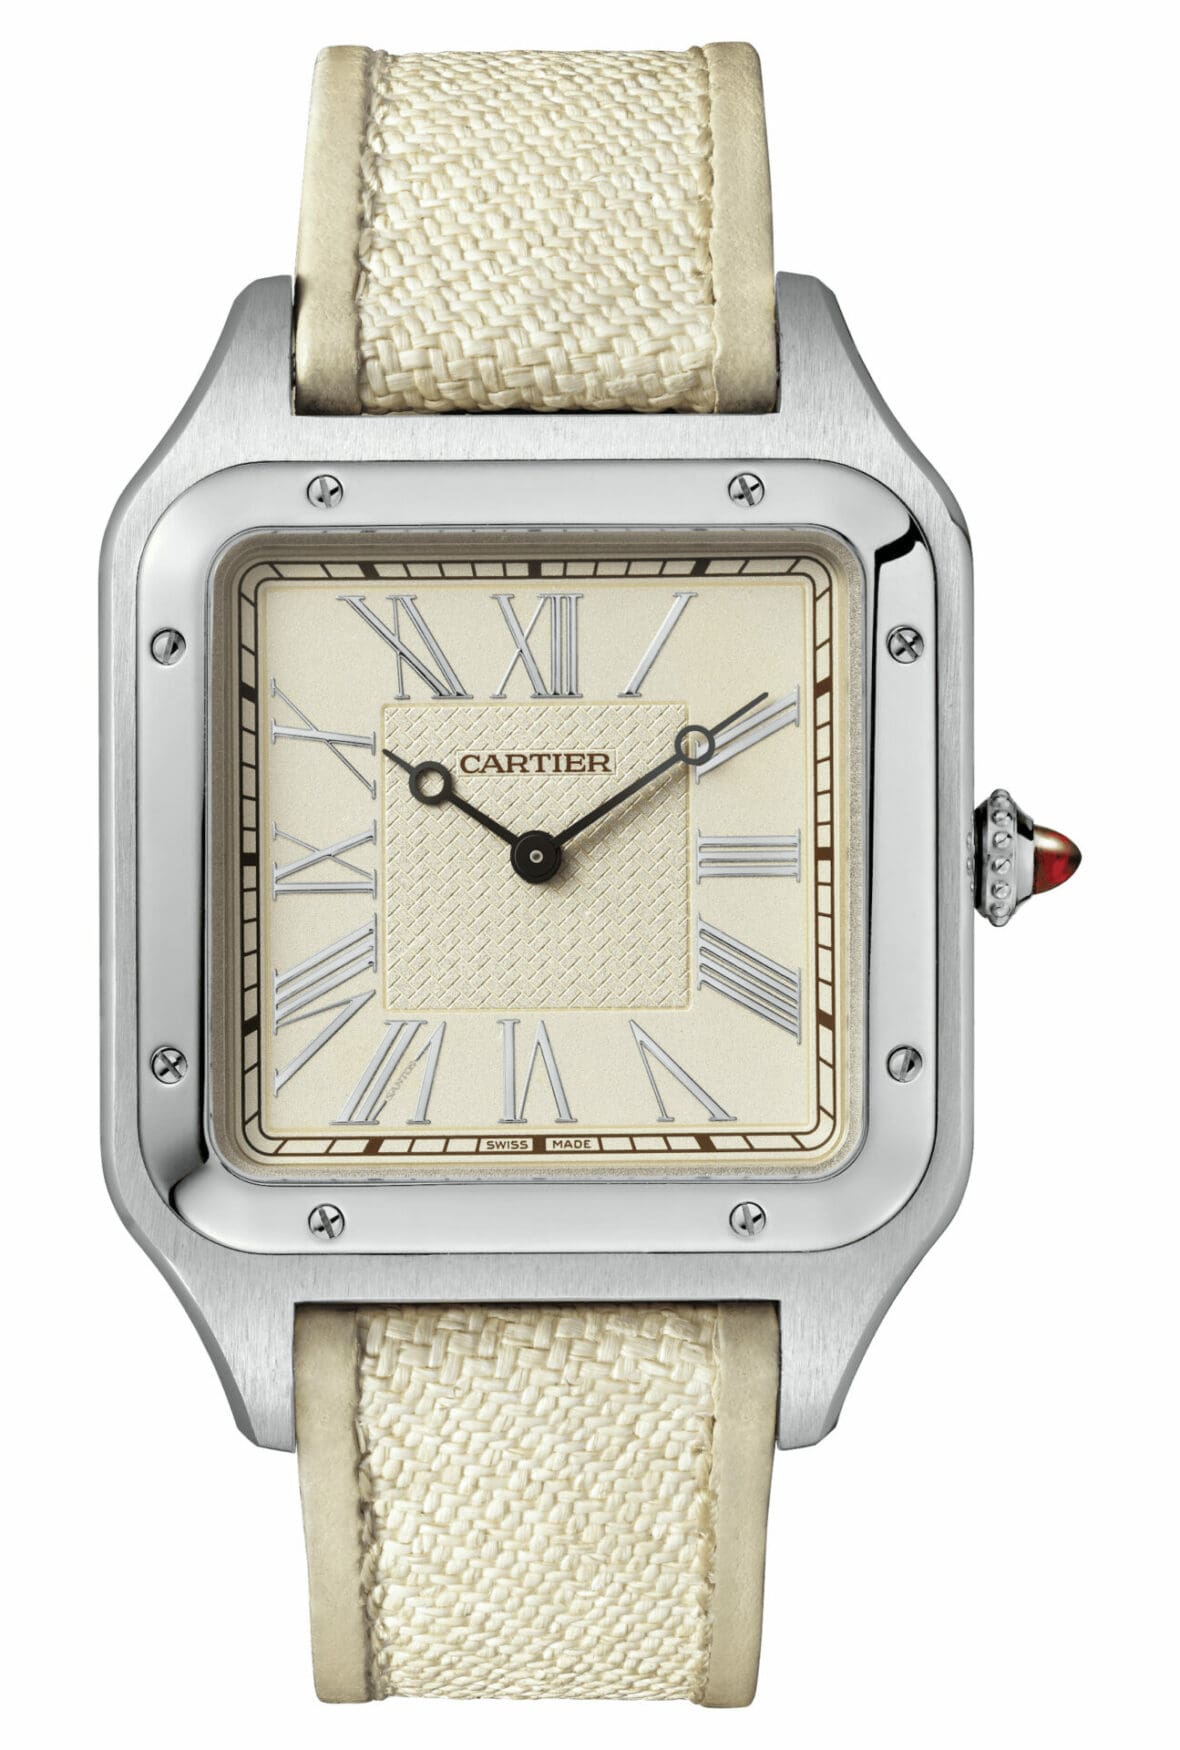 Everything you need to know about the Cartier 2020 collection